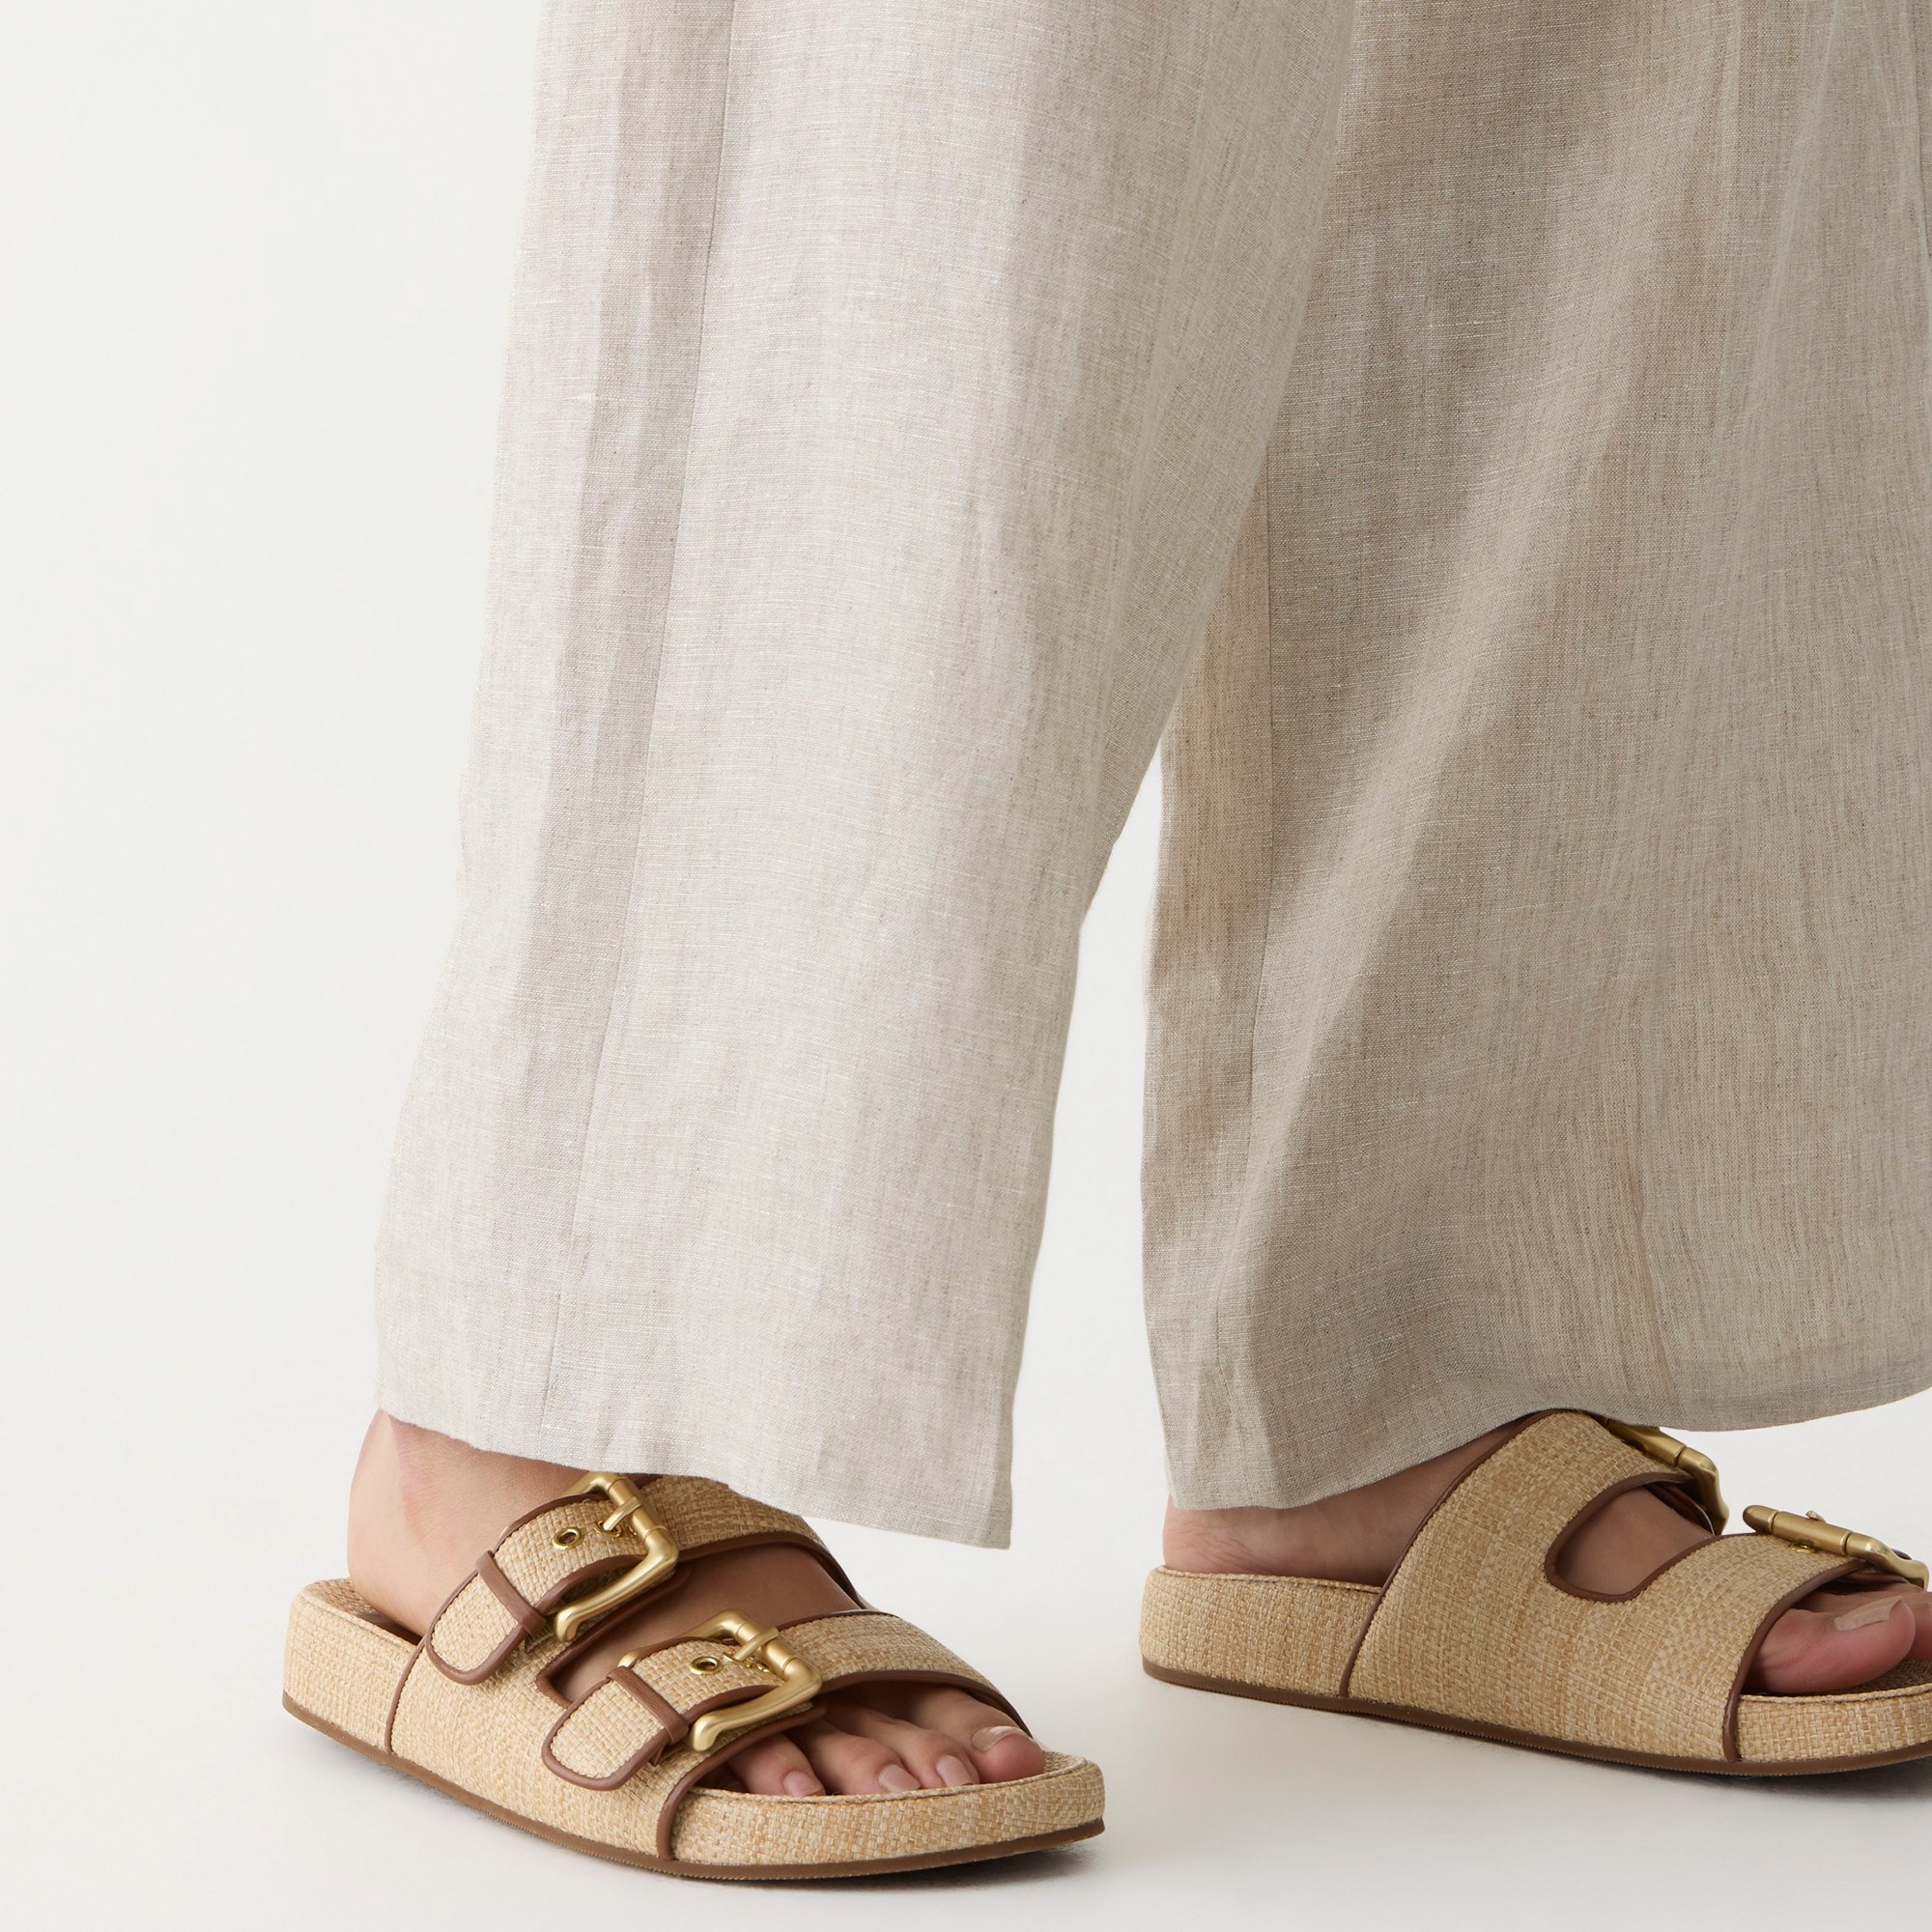 Jcrew Marlow sandals in croc-embossed leather